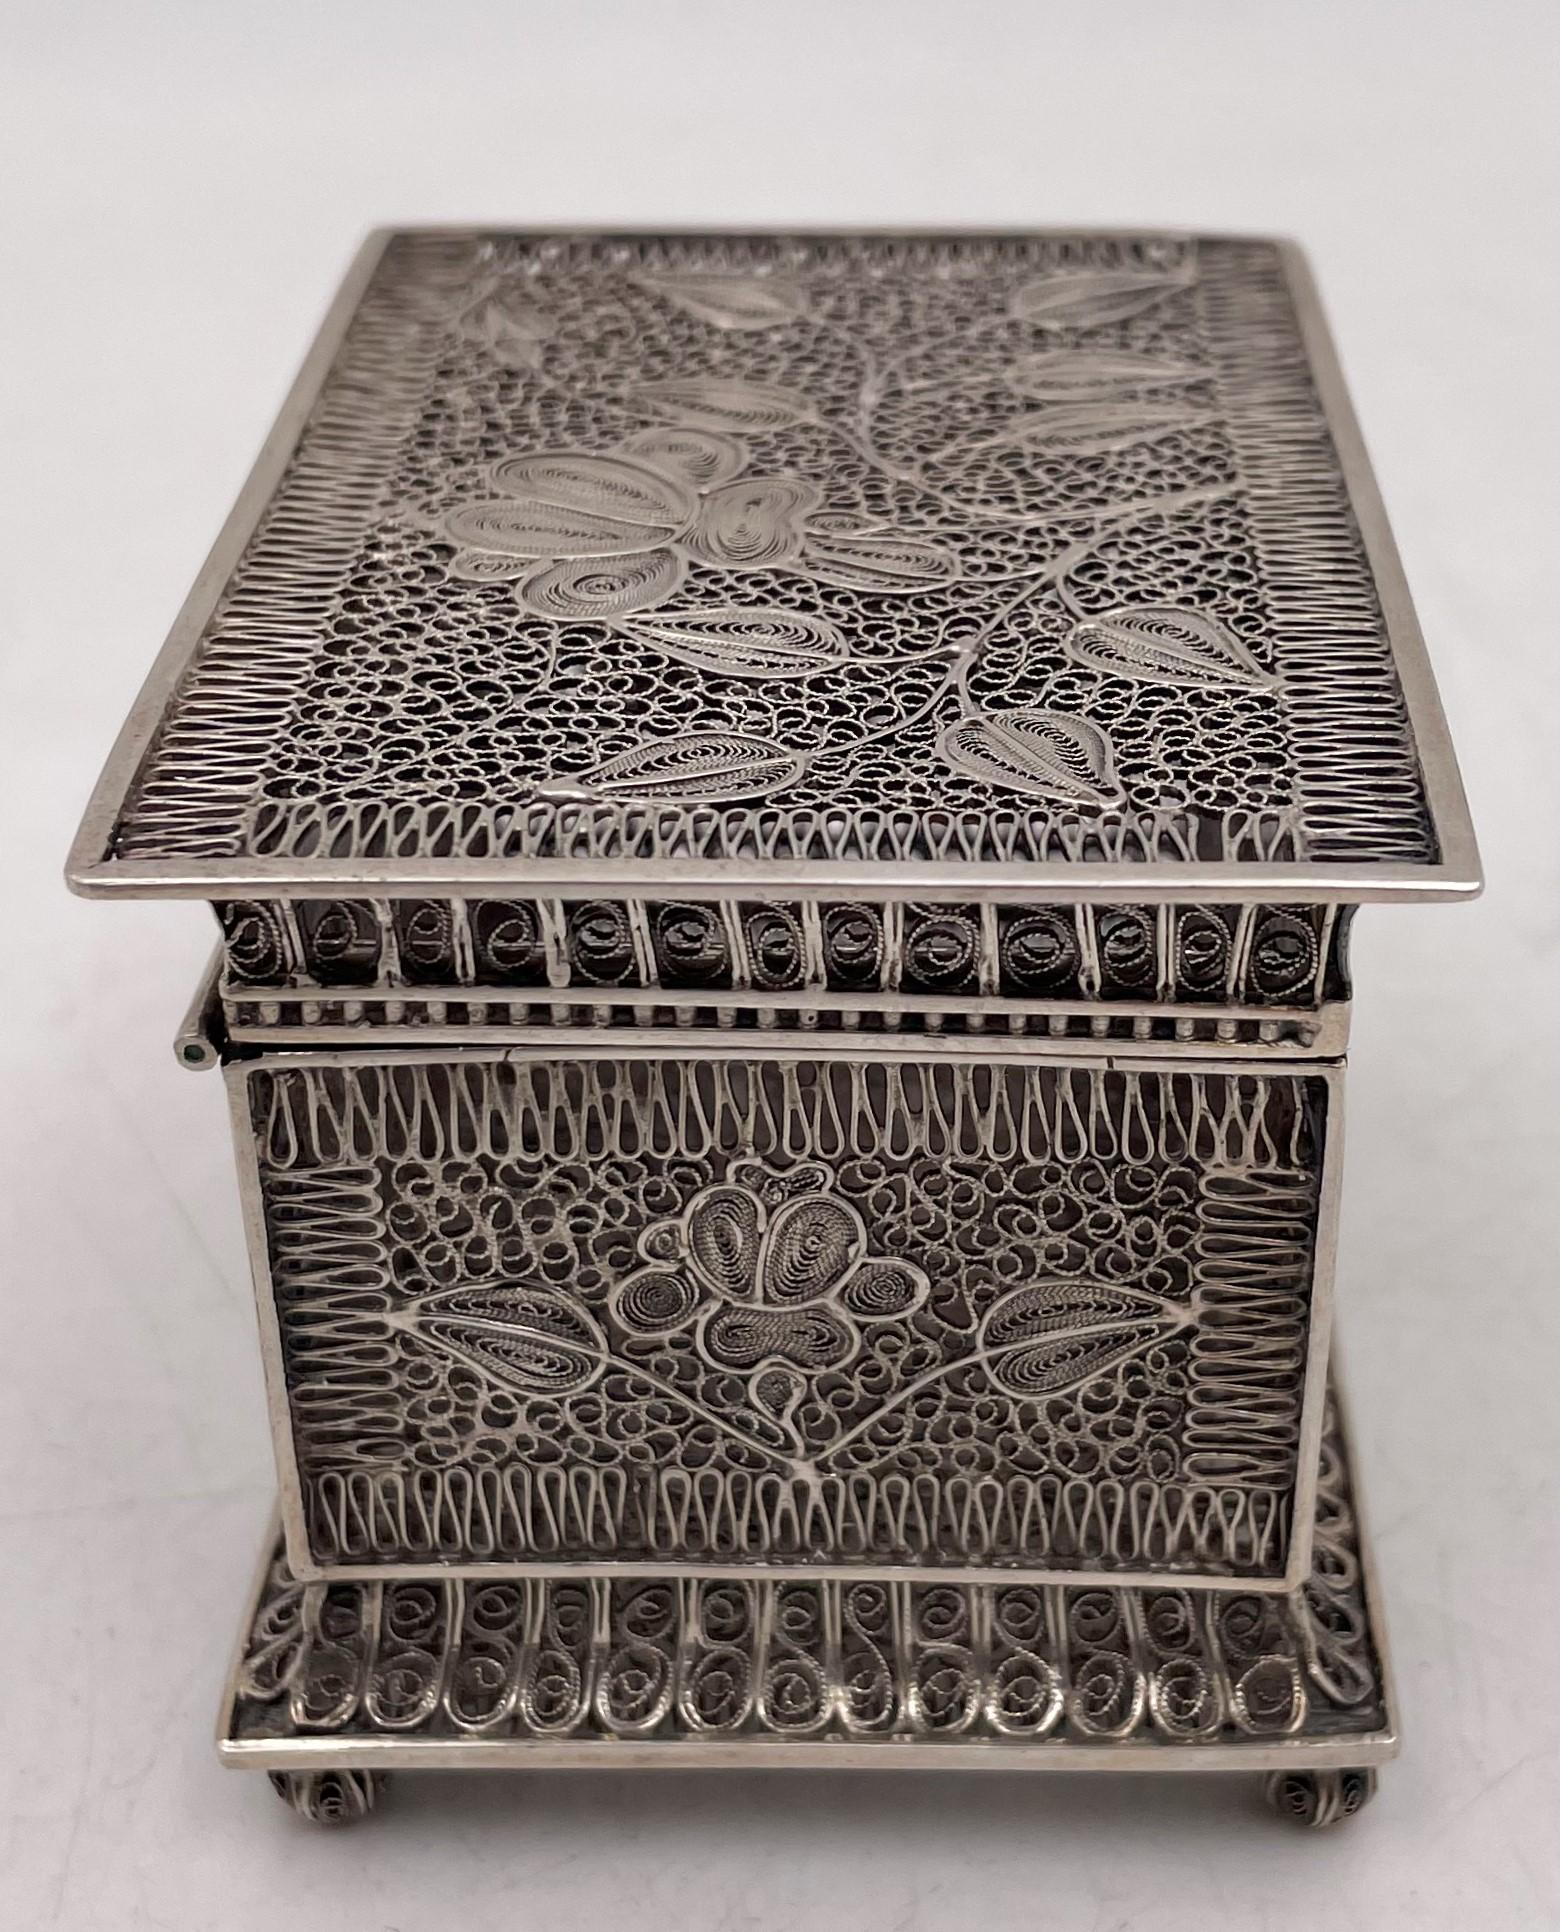 Silver box, in filigree motif, probably Russian or Chinese, showcasing intricate floral and geometric designs, from the early 20th century, measuring 3 1/4'' in length by 2 1/4'' in width by 2 1/4'' in height. 

Please feel free to ask us any